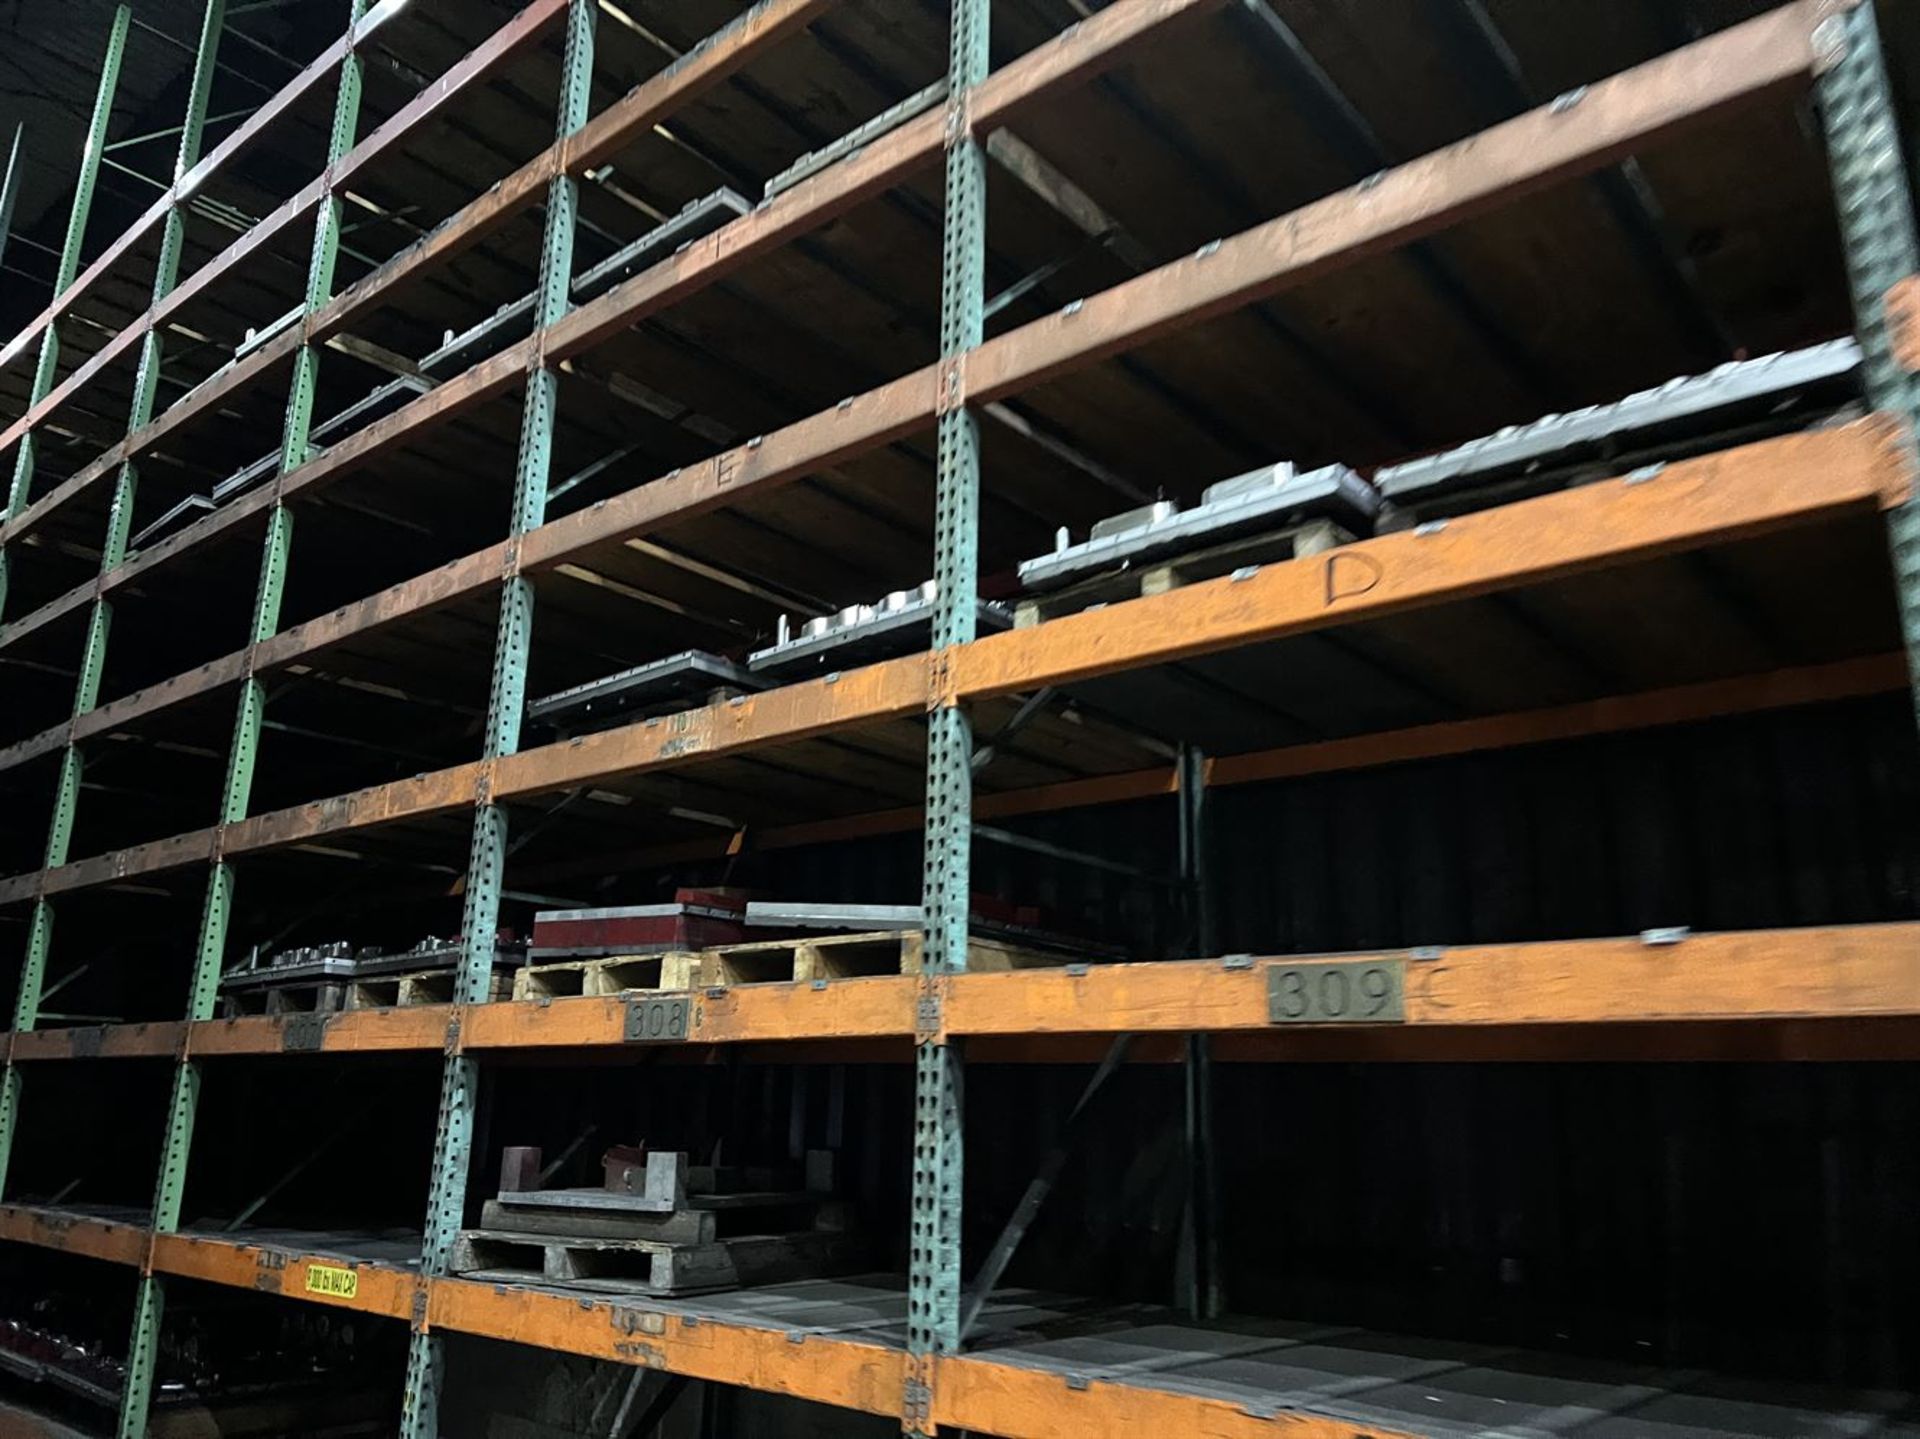 Lot of (11) Sections of Pallet Racking, Approx. 24'Uprights x 7'Crossbeams x 46"Deep - Image 4 of 4